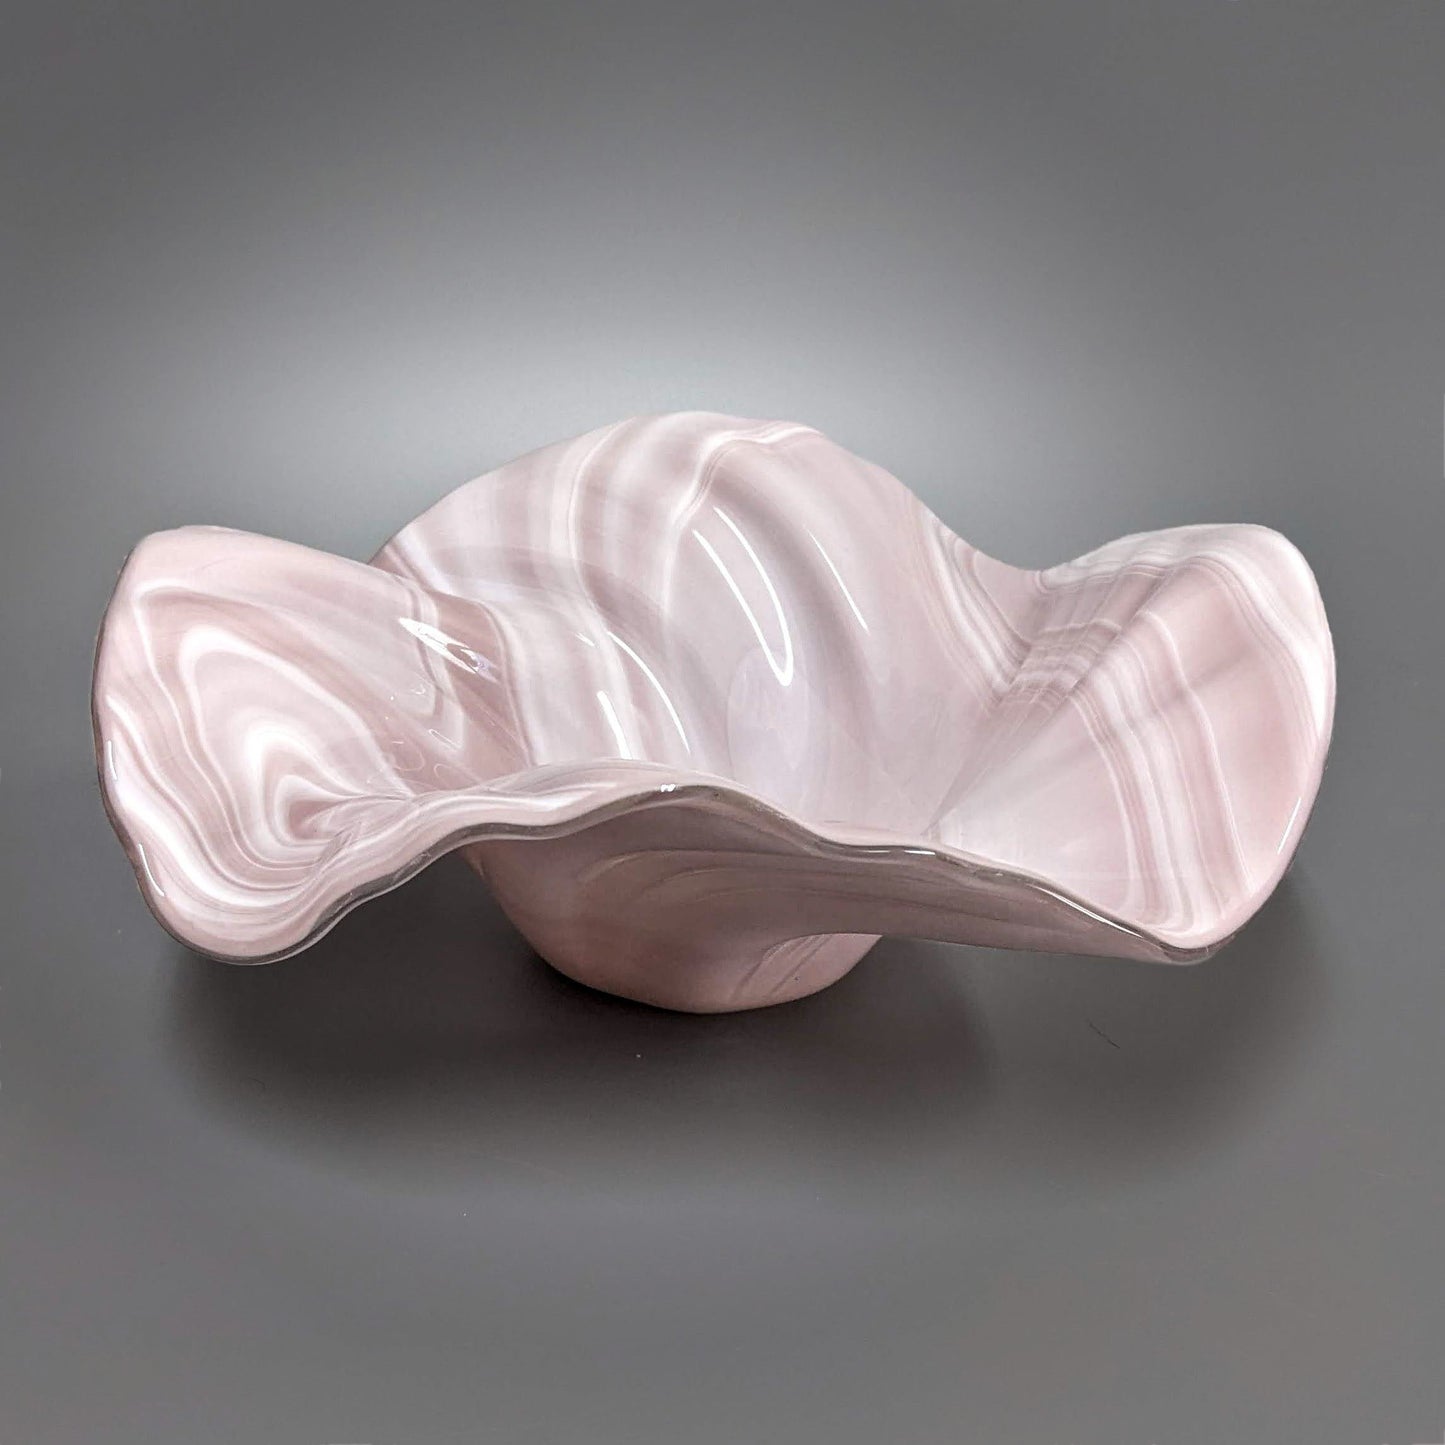 Glass Art Wave Bowl in Pink Mauve White | Handcrafted Home Décor Gifts